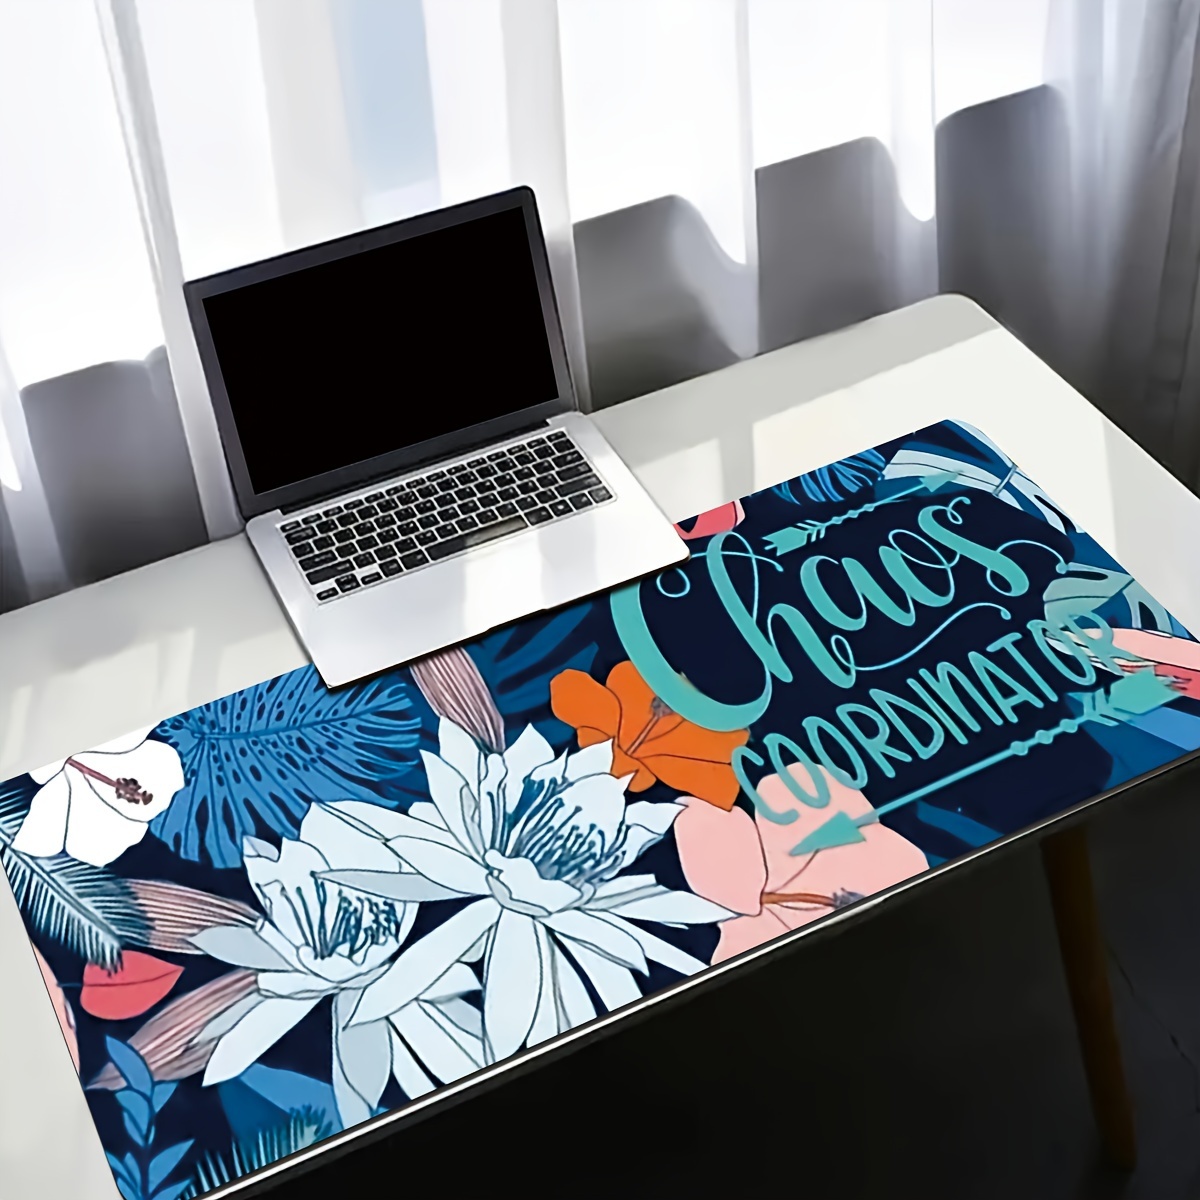 

1pc Minimalist Design Inspirational Word Flower Large Mouse Pad Computer High-definition Keyboard Pad Mouse Pad Table Pad Natural Rubber Anti-slip Office Mouse Pad Table Accessories